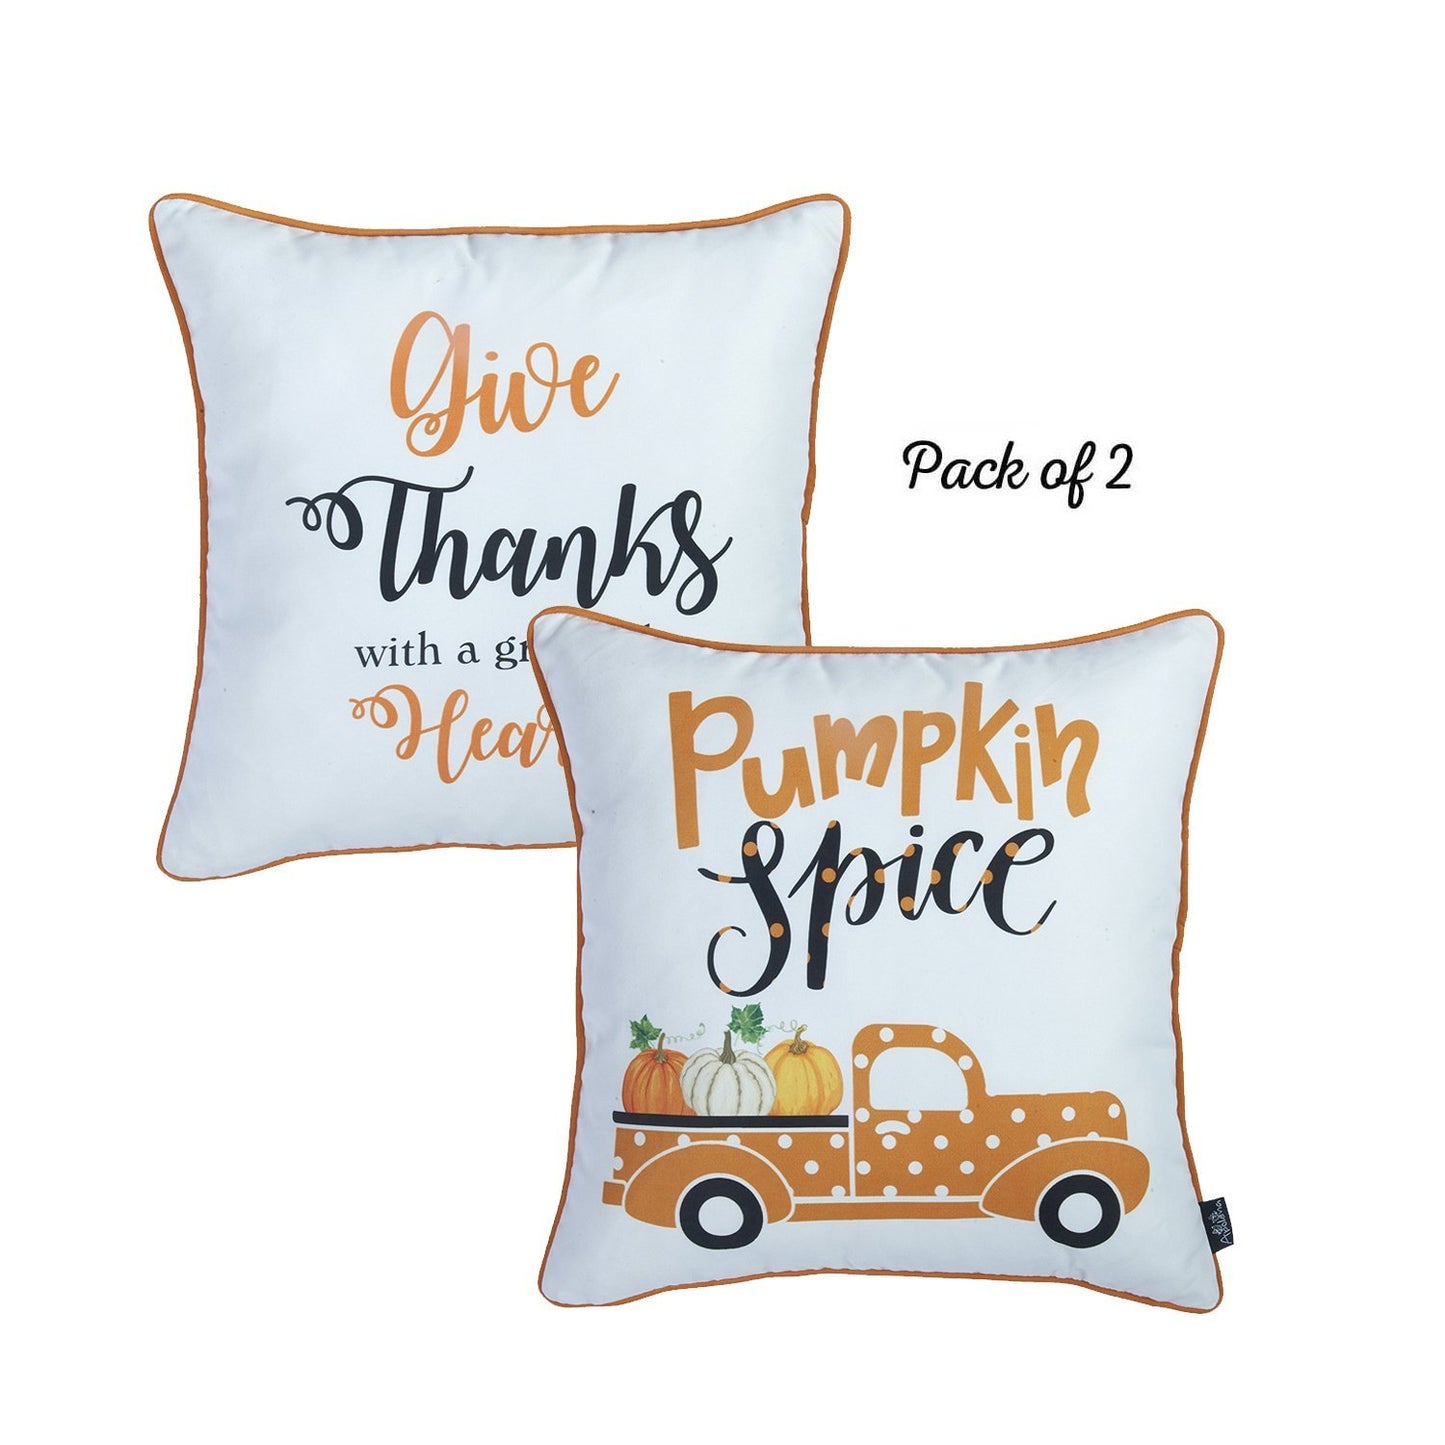 Set of 2 18inches Thanksgiving Pumpkin Spice Square Throw Pillow Cover